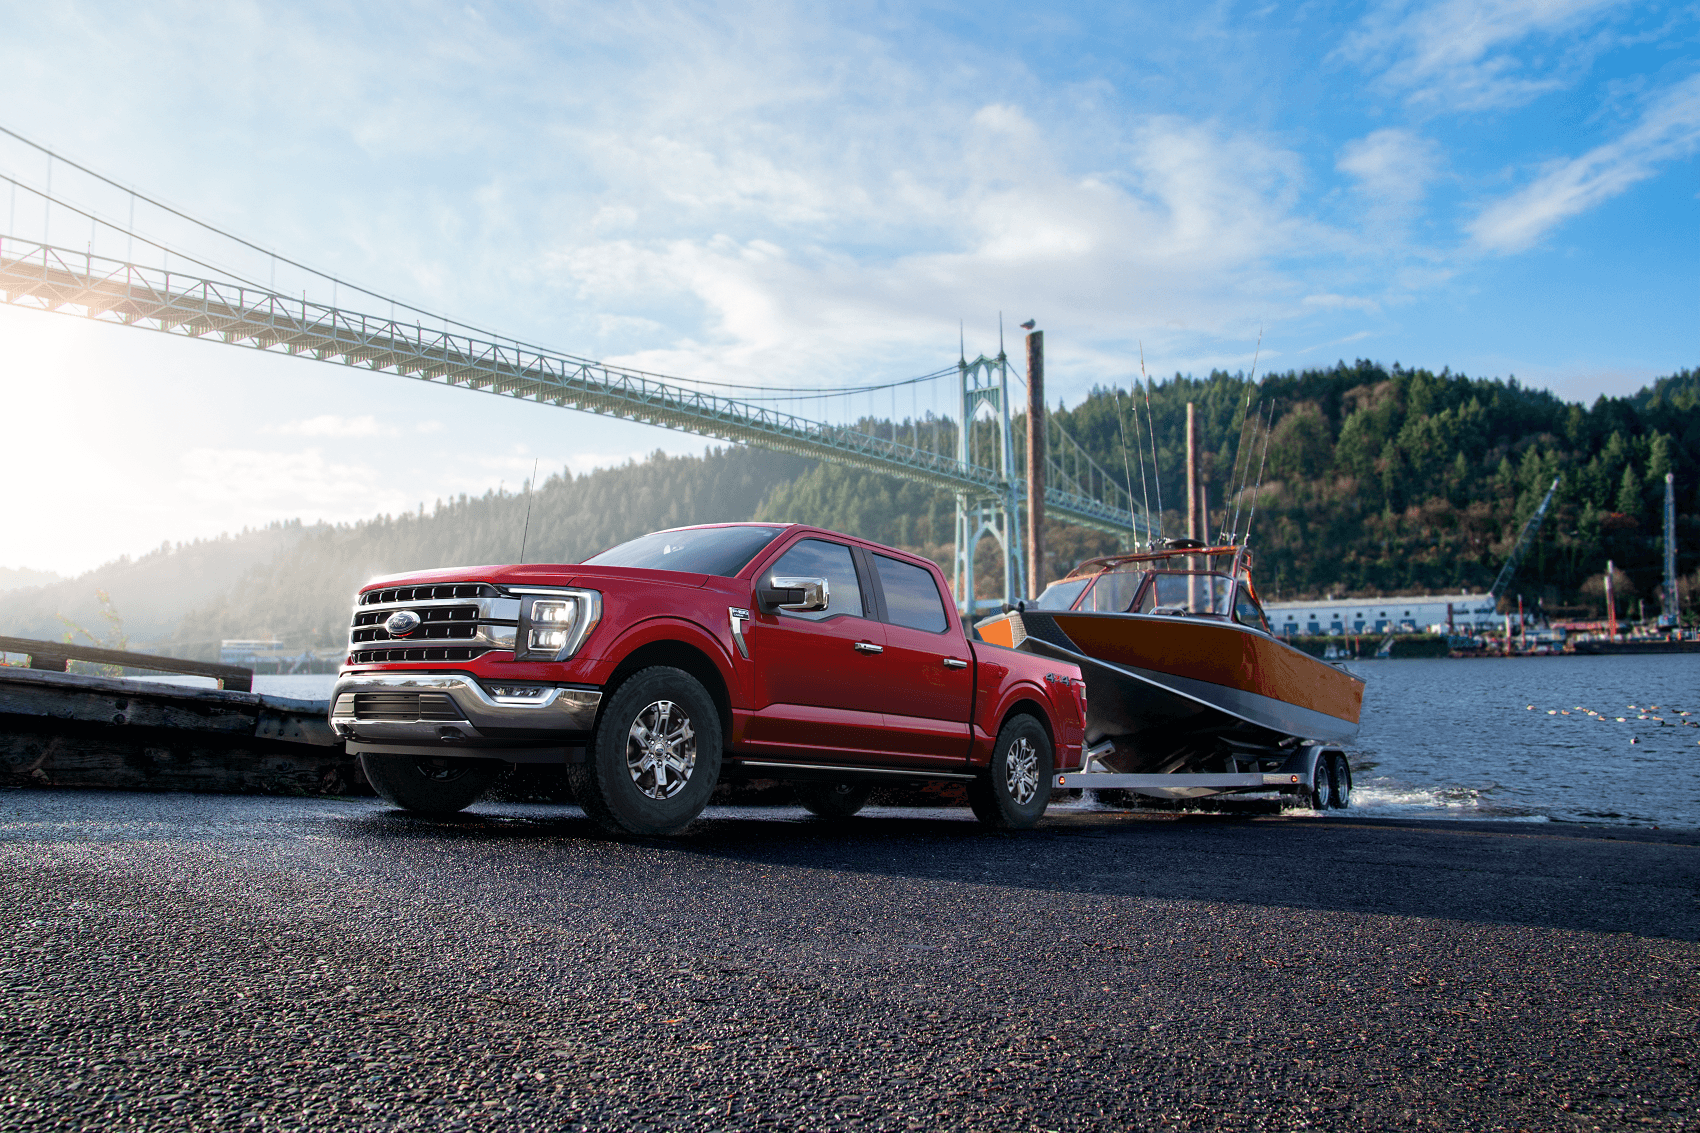 Ford F-150 towing a boat